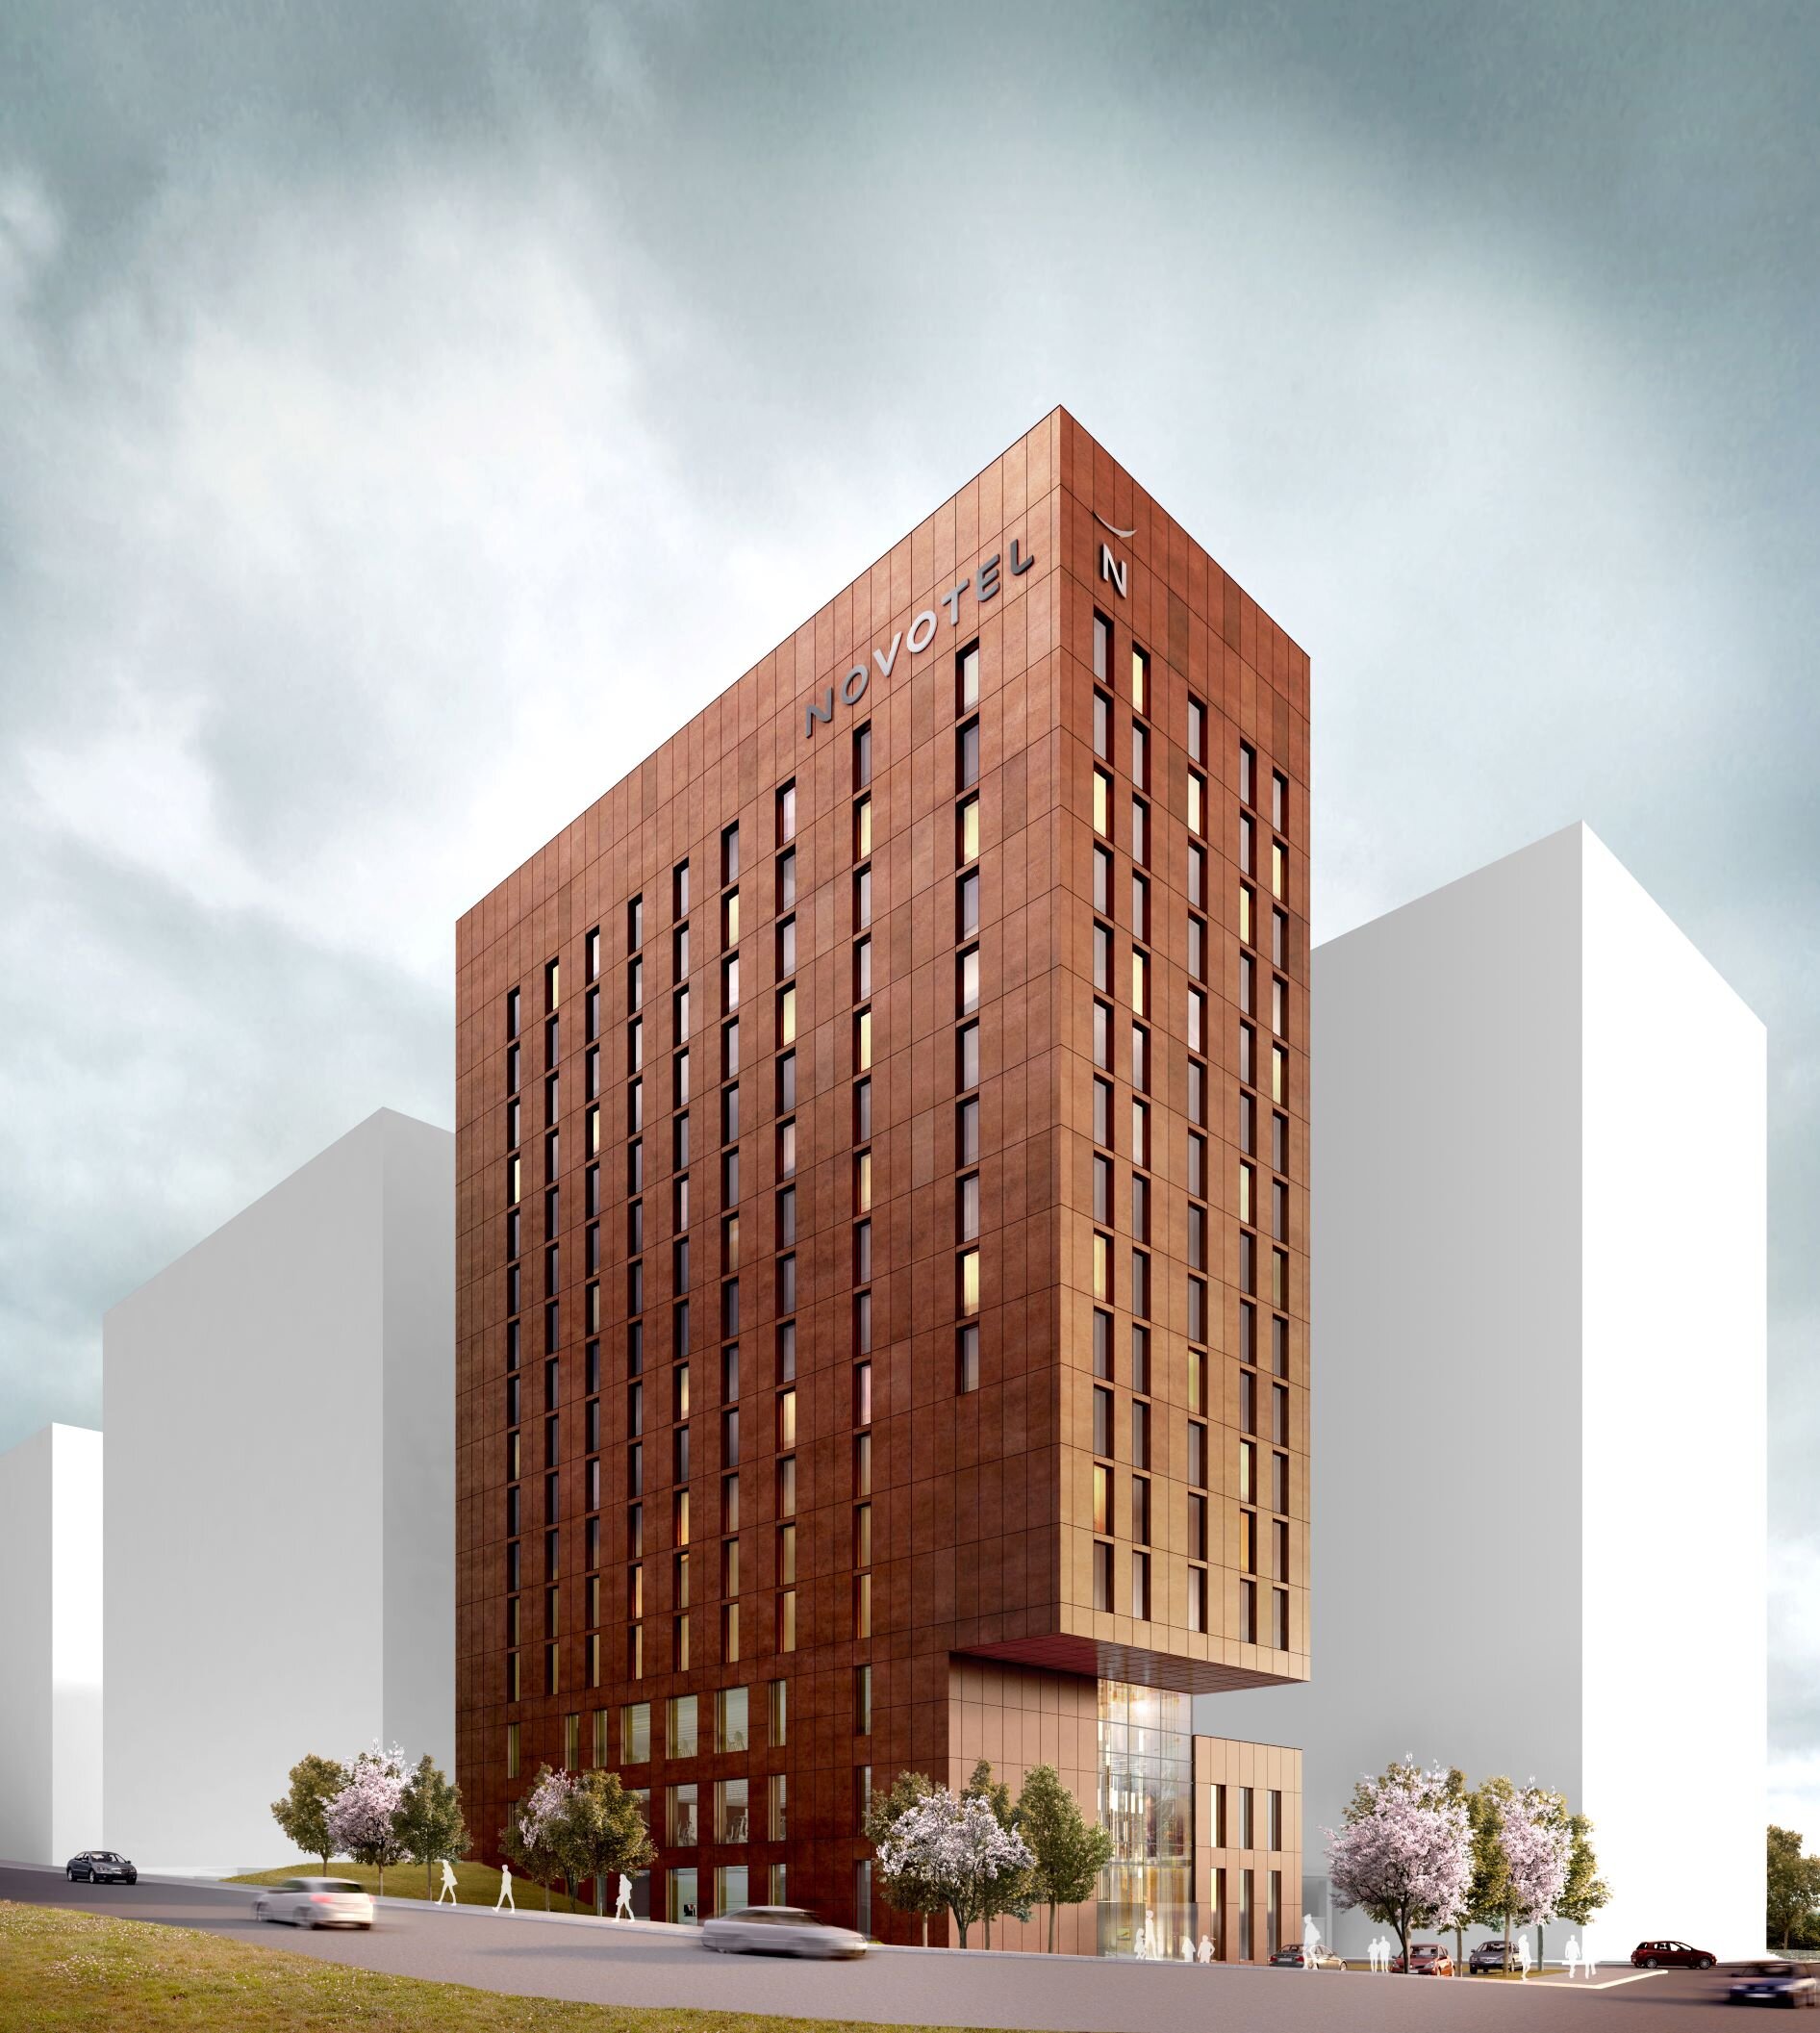 Novotel to become Liverpool’s highest hotel